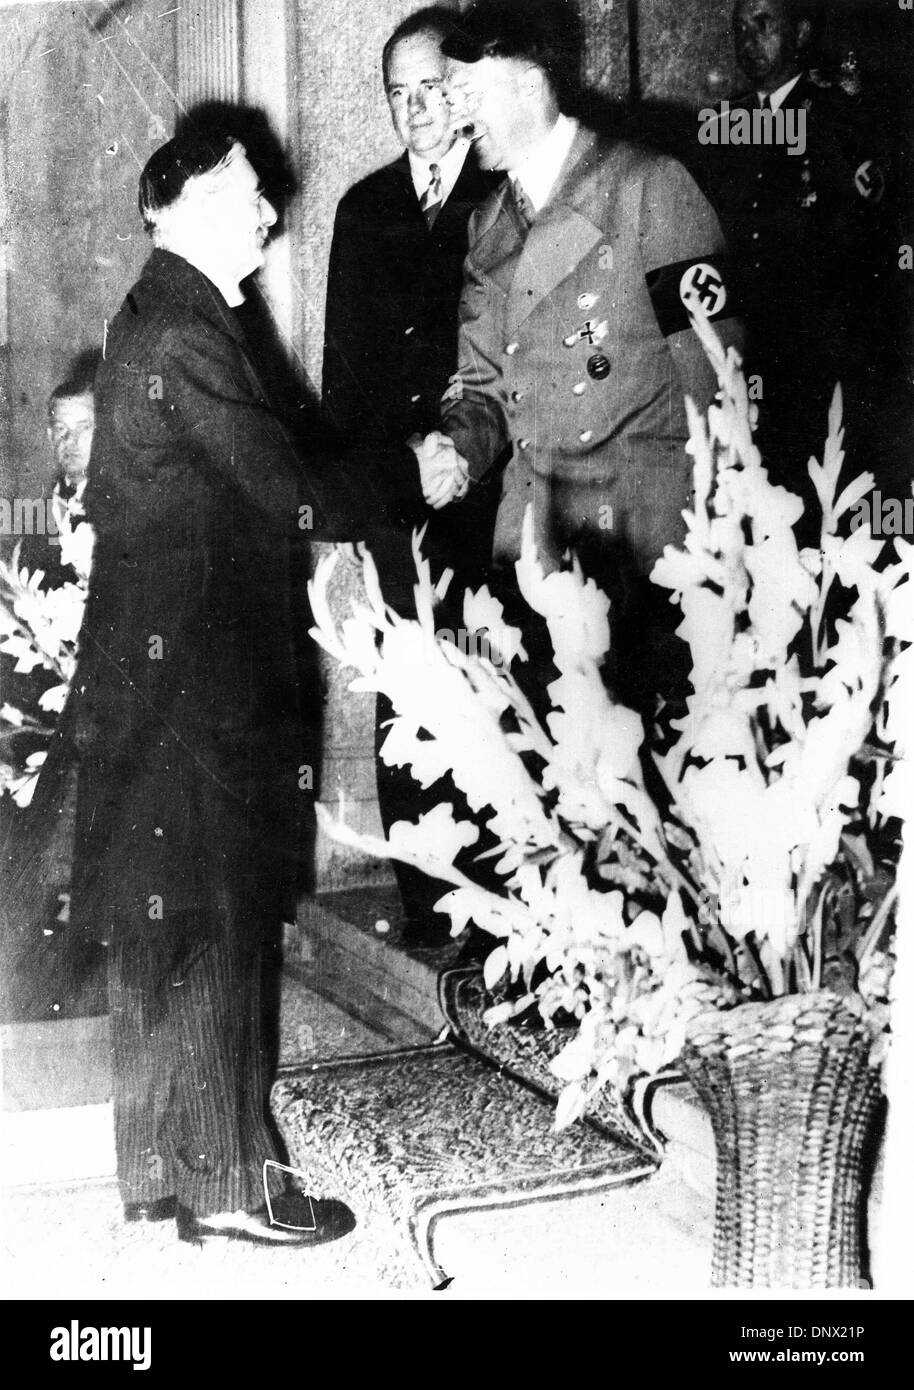 Sept. 29, 1938 - Munich, Germany - ADOLF HITLER shaking hands with NEVILLE CHAMBERLAIN. Adolf Hitler (April 20, 1889ÐApril 30, 1945) was the Fuhrer und Reichskanzler (Leader and Imperial chancellor) of Germany from 1933 to his death. He was leader of the National Socialist German Workers Party (NSDAP), better known as the Nazi Party. (Credit Image: © KEYSTONE Pictures USA/ZUMAPRESS Stock Photo